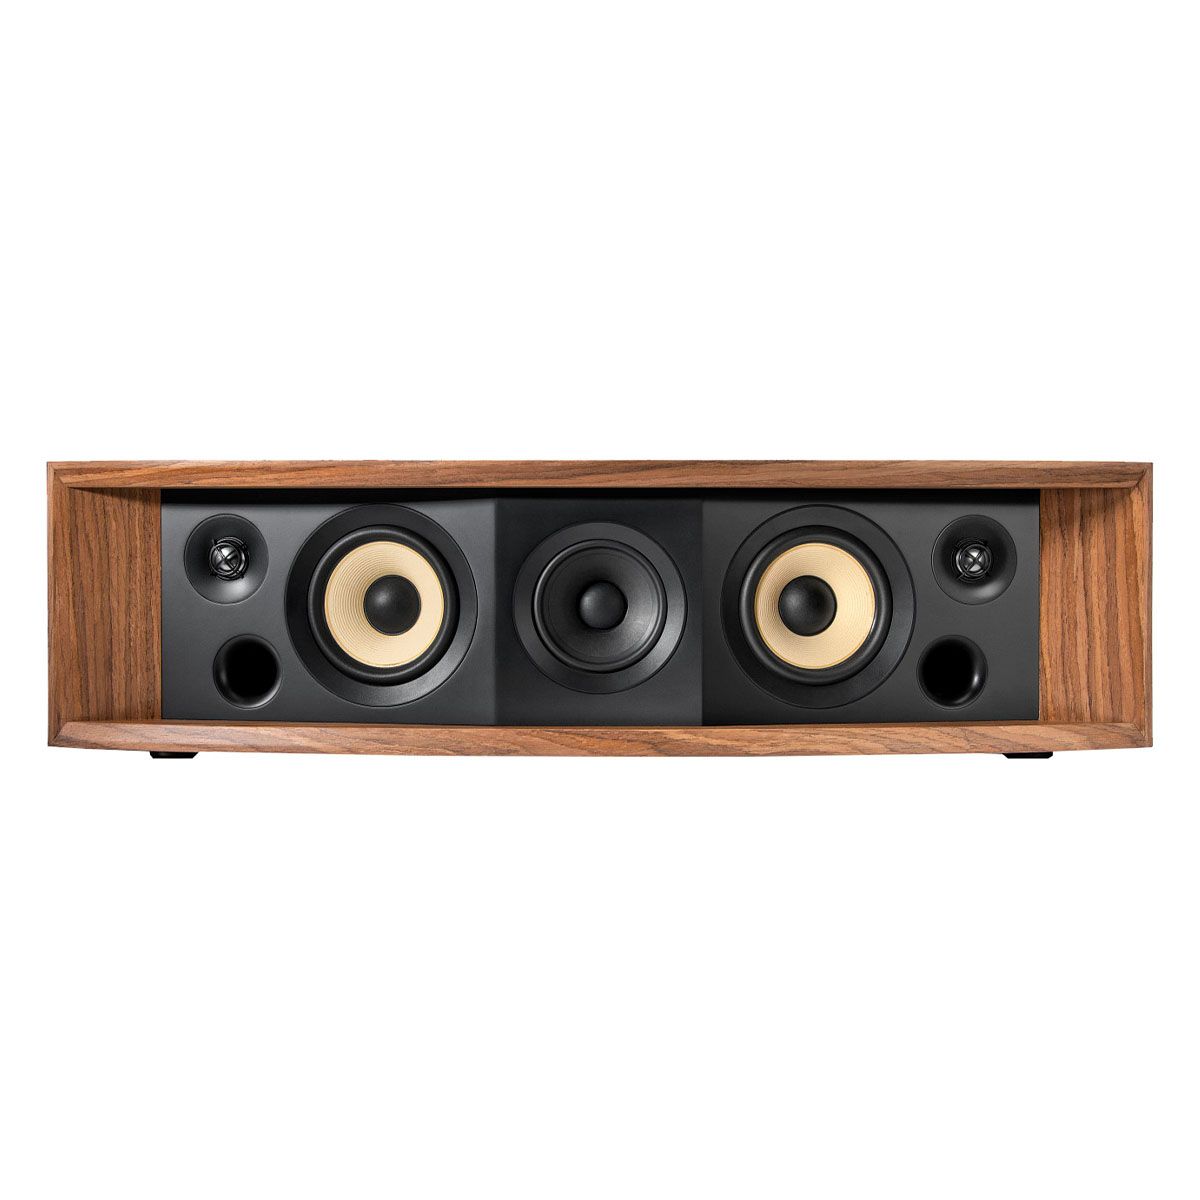 JBL L75ms Music System - Walnut front view without grille